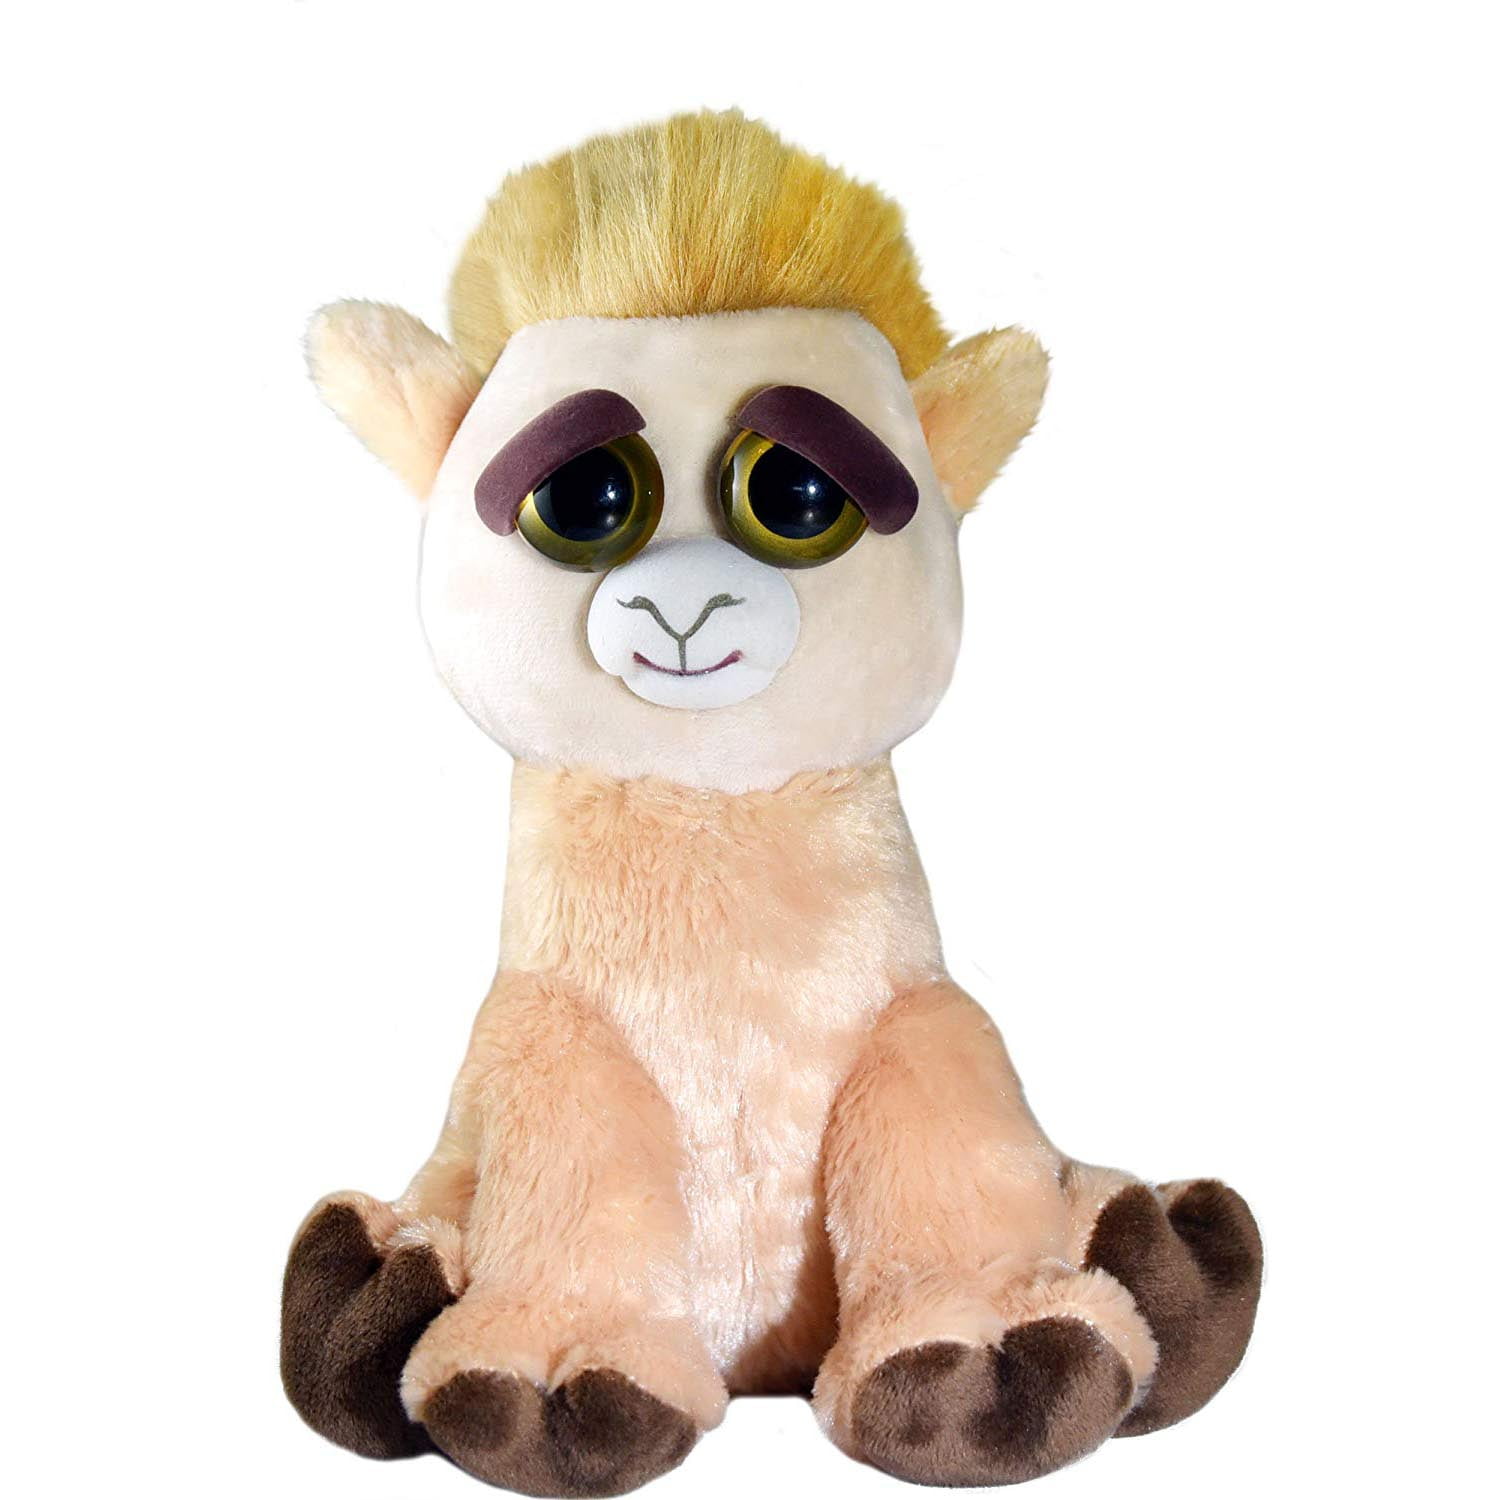 A Cute William Mark Plush Stuffed Pet Animal That Sticks Her Tongue Out With a Squeeze Perfect Toys For Friendly Mischief FP015T Glenda Glitterpoop Silly Feisty Unicorn by Feisty Pets Expressions